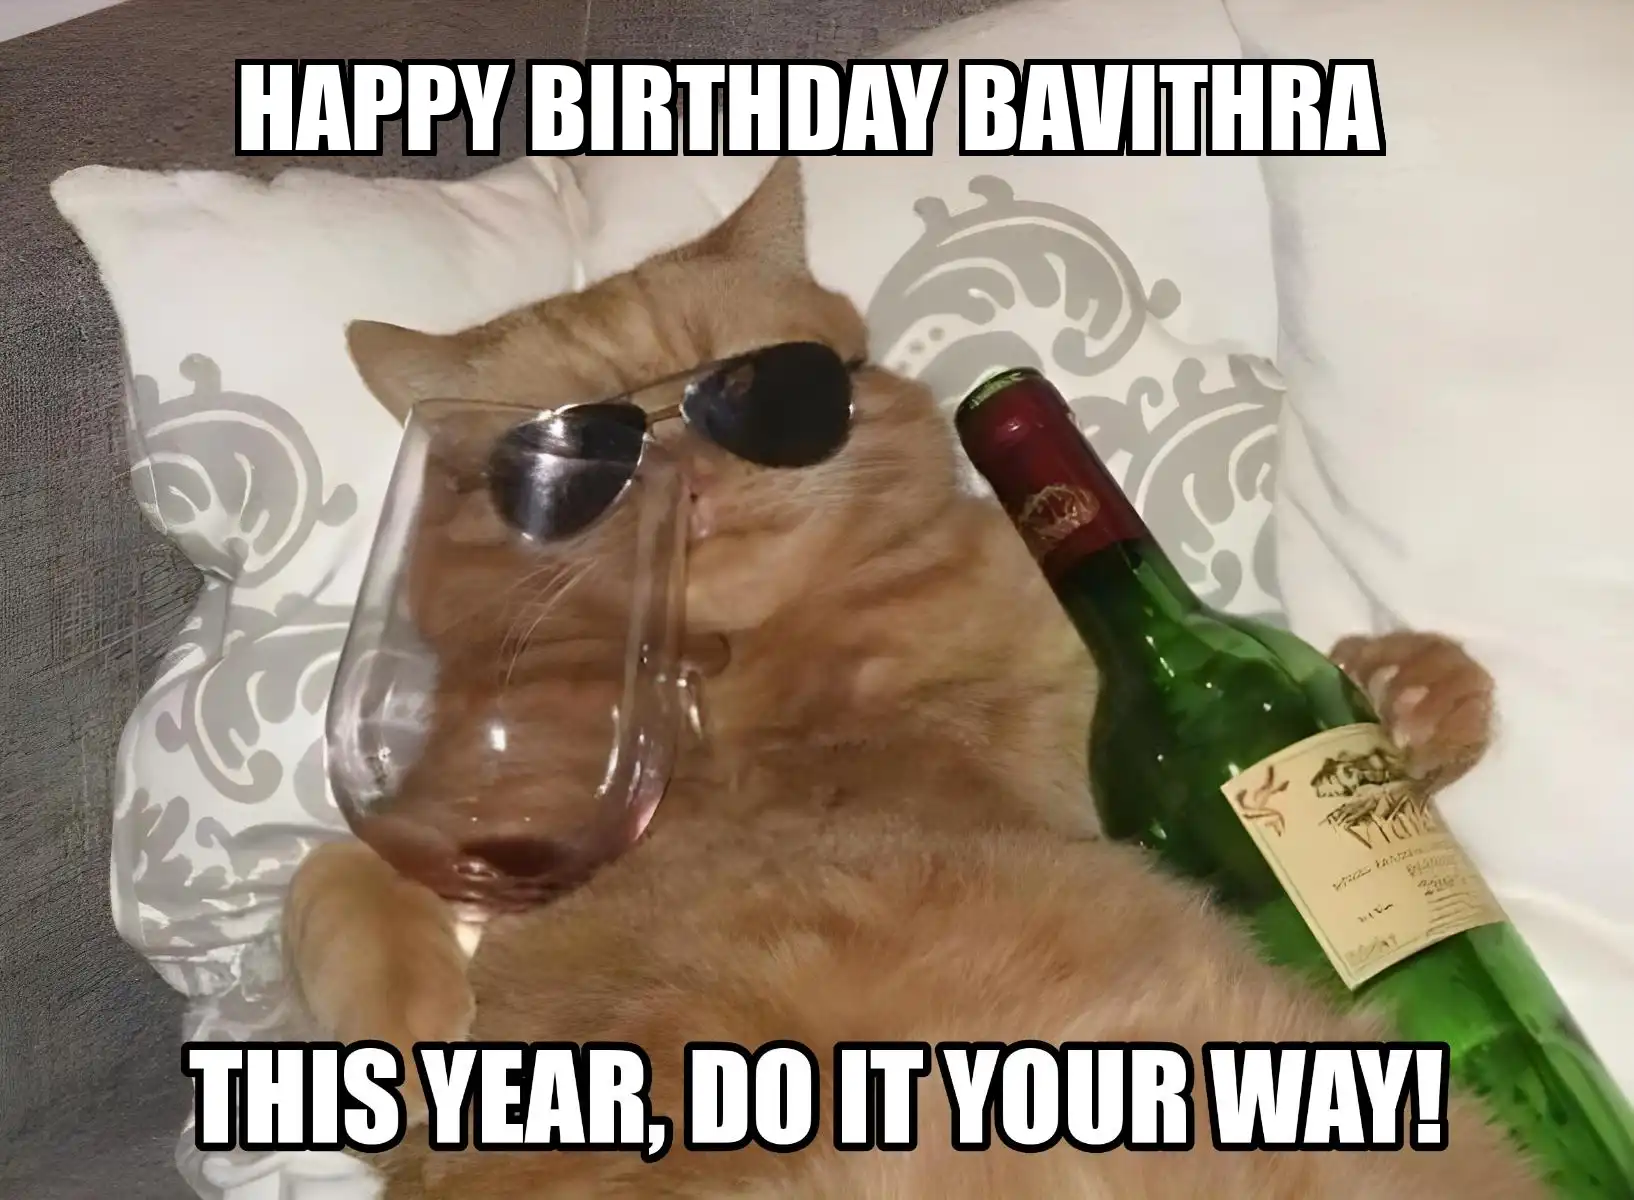 Happy Birthday Bavithra This Year Do It Your Way Meme